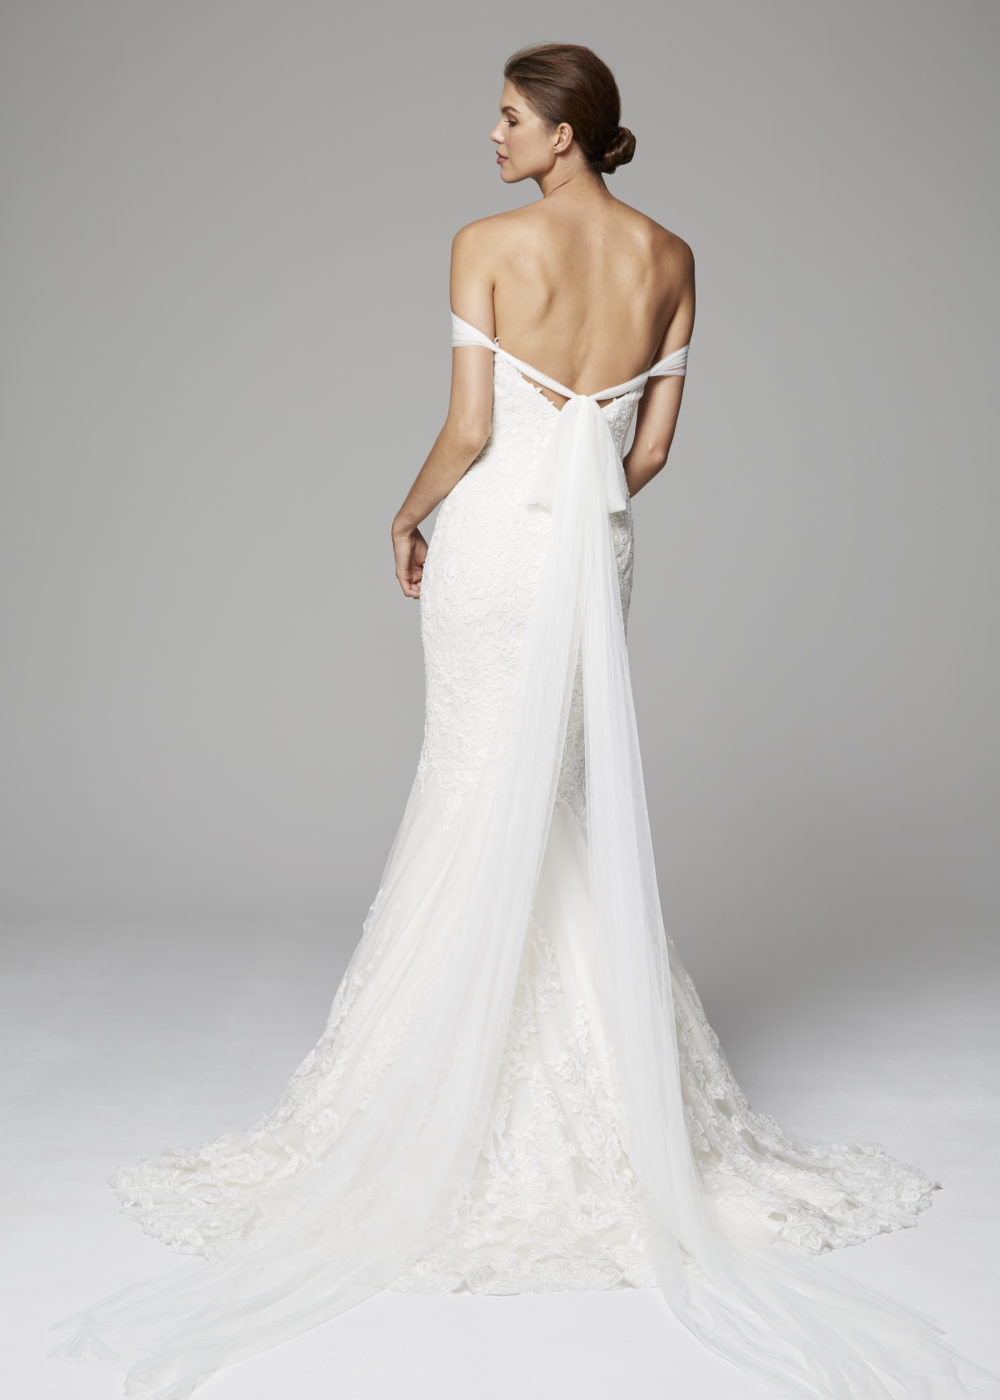 Refined mermaid gown of beaded embroidered lace with tulle off-the-shoulder drape extending to train.